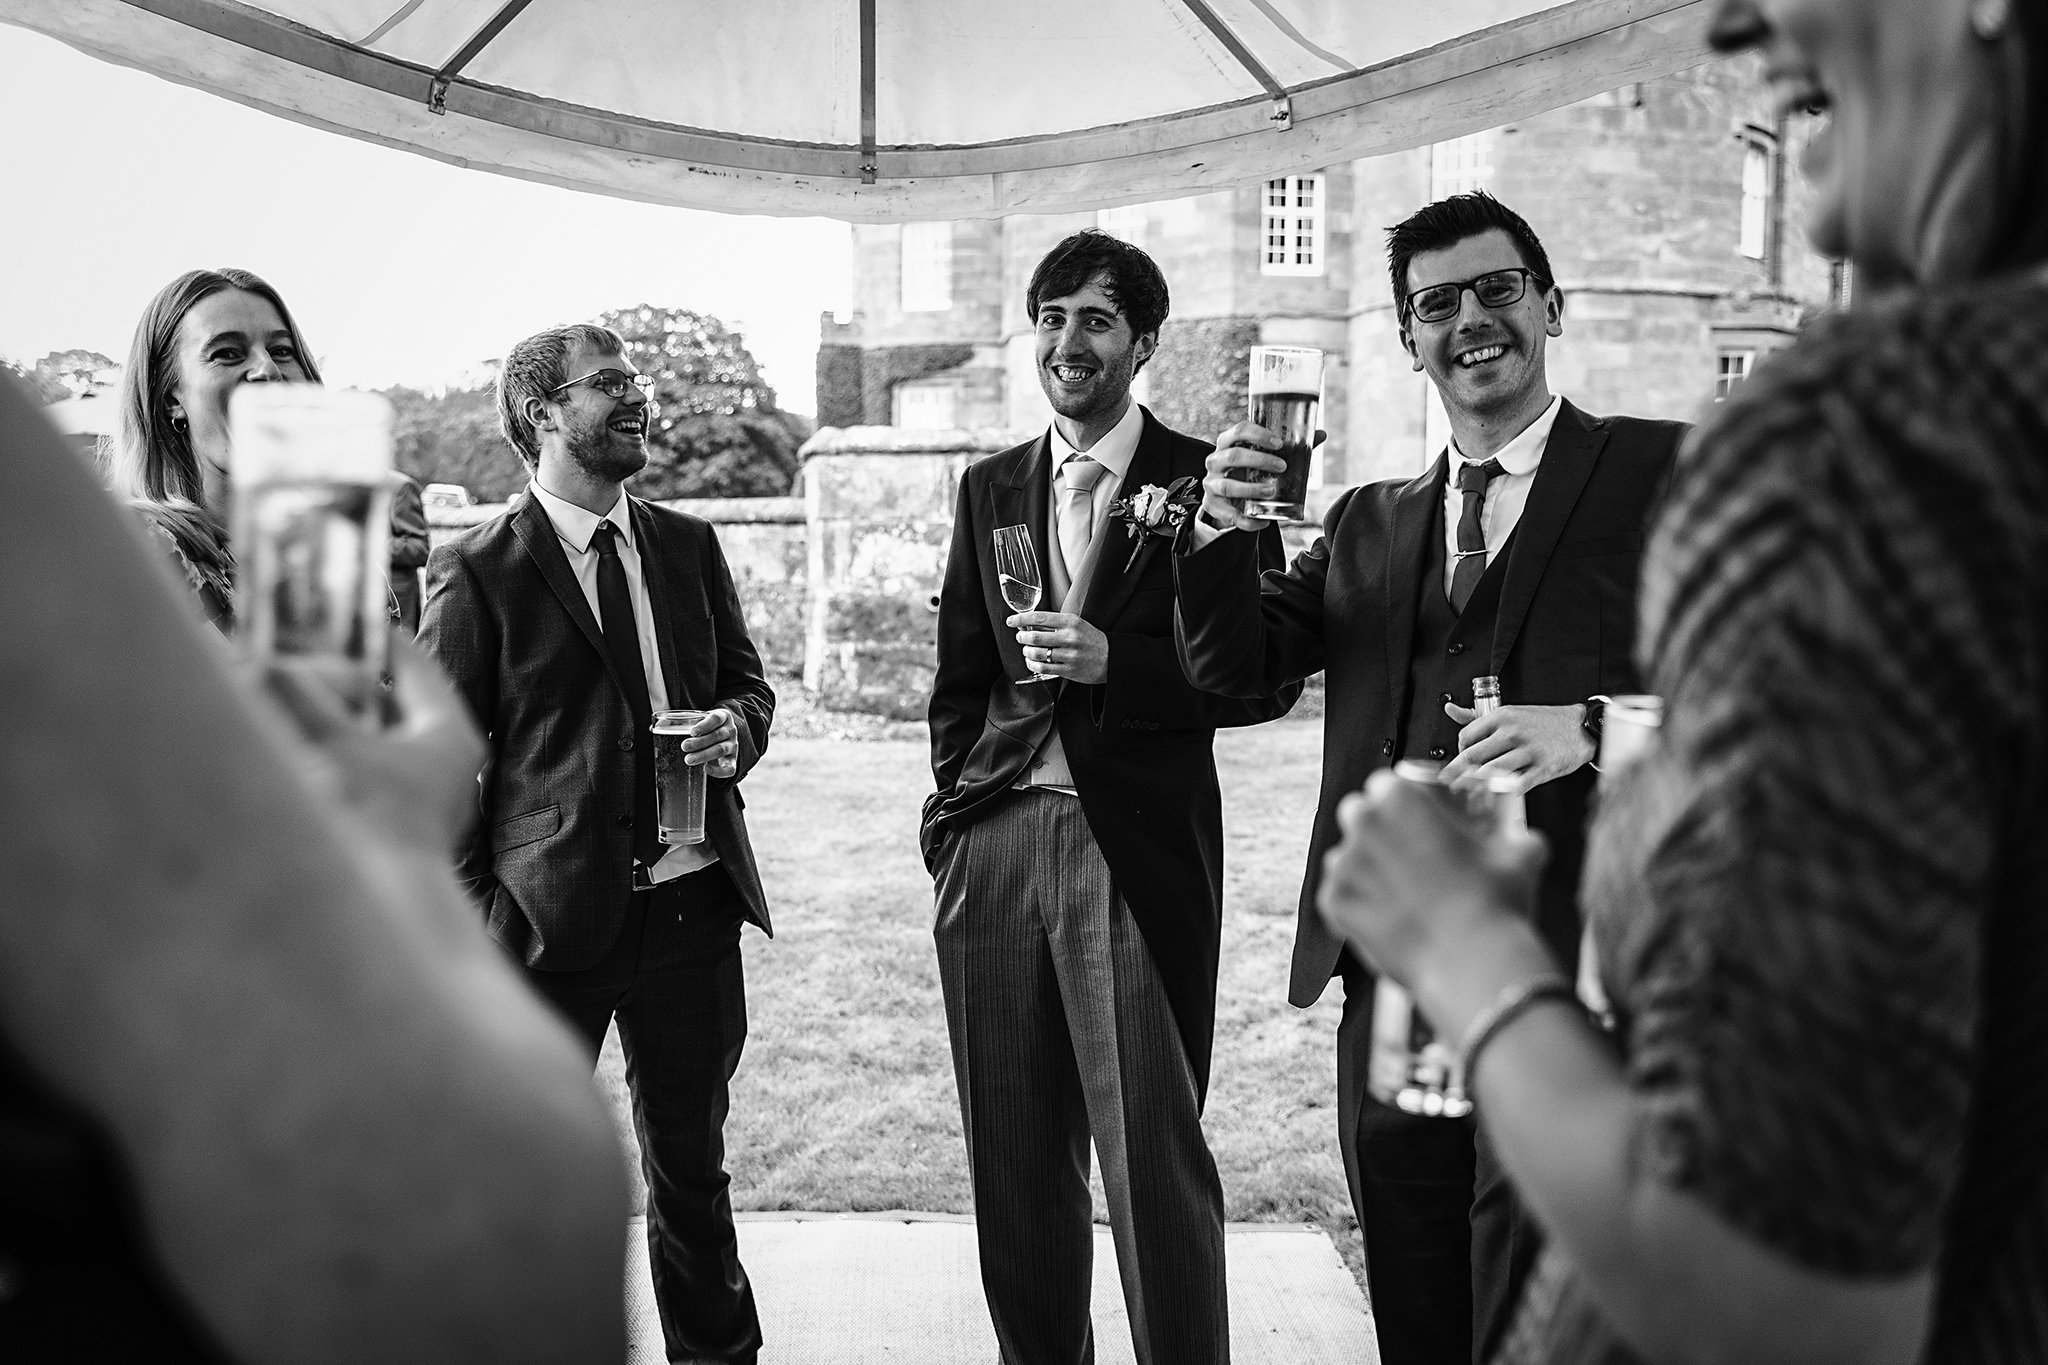  A groom and his friends at a wedding reception 